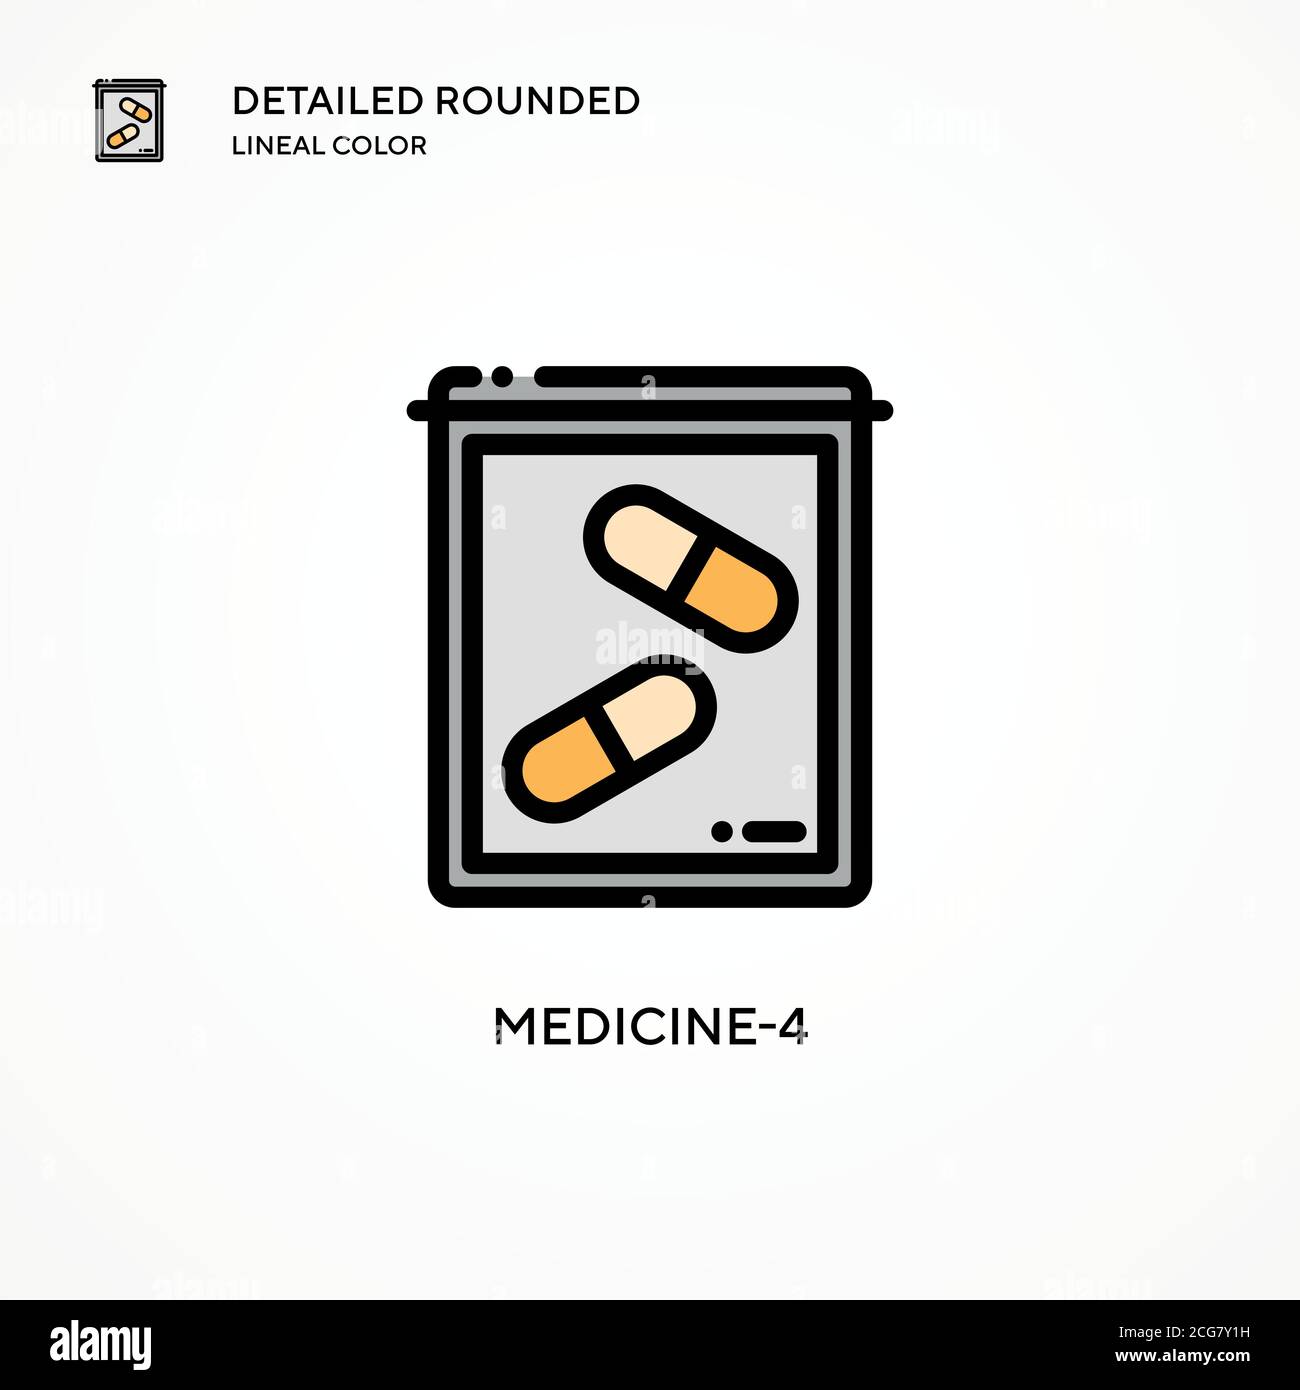 Medicine-4 vector icon. Modern vector illustration concepts. Easy to edit and customize. Stock Vector